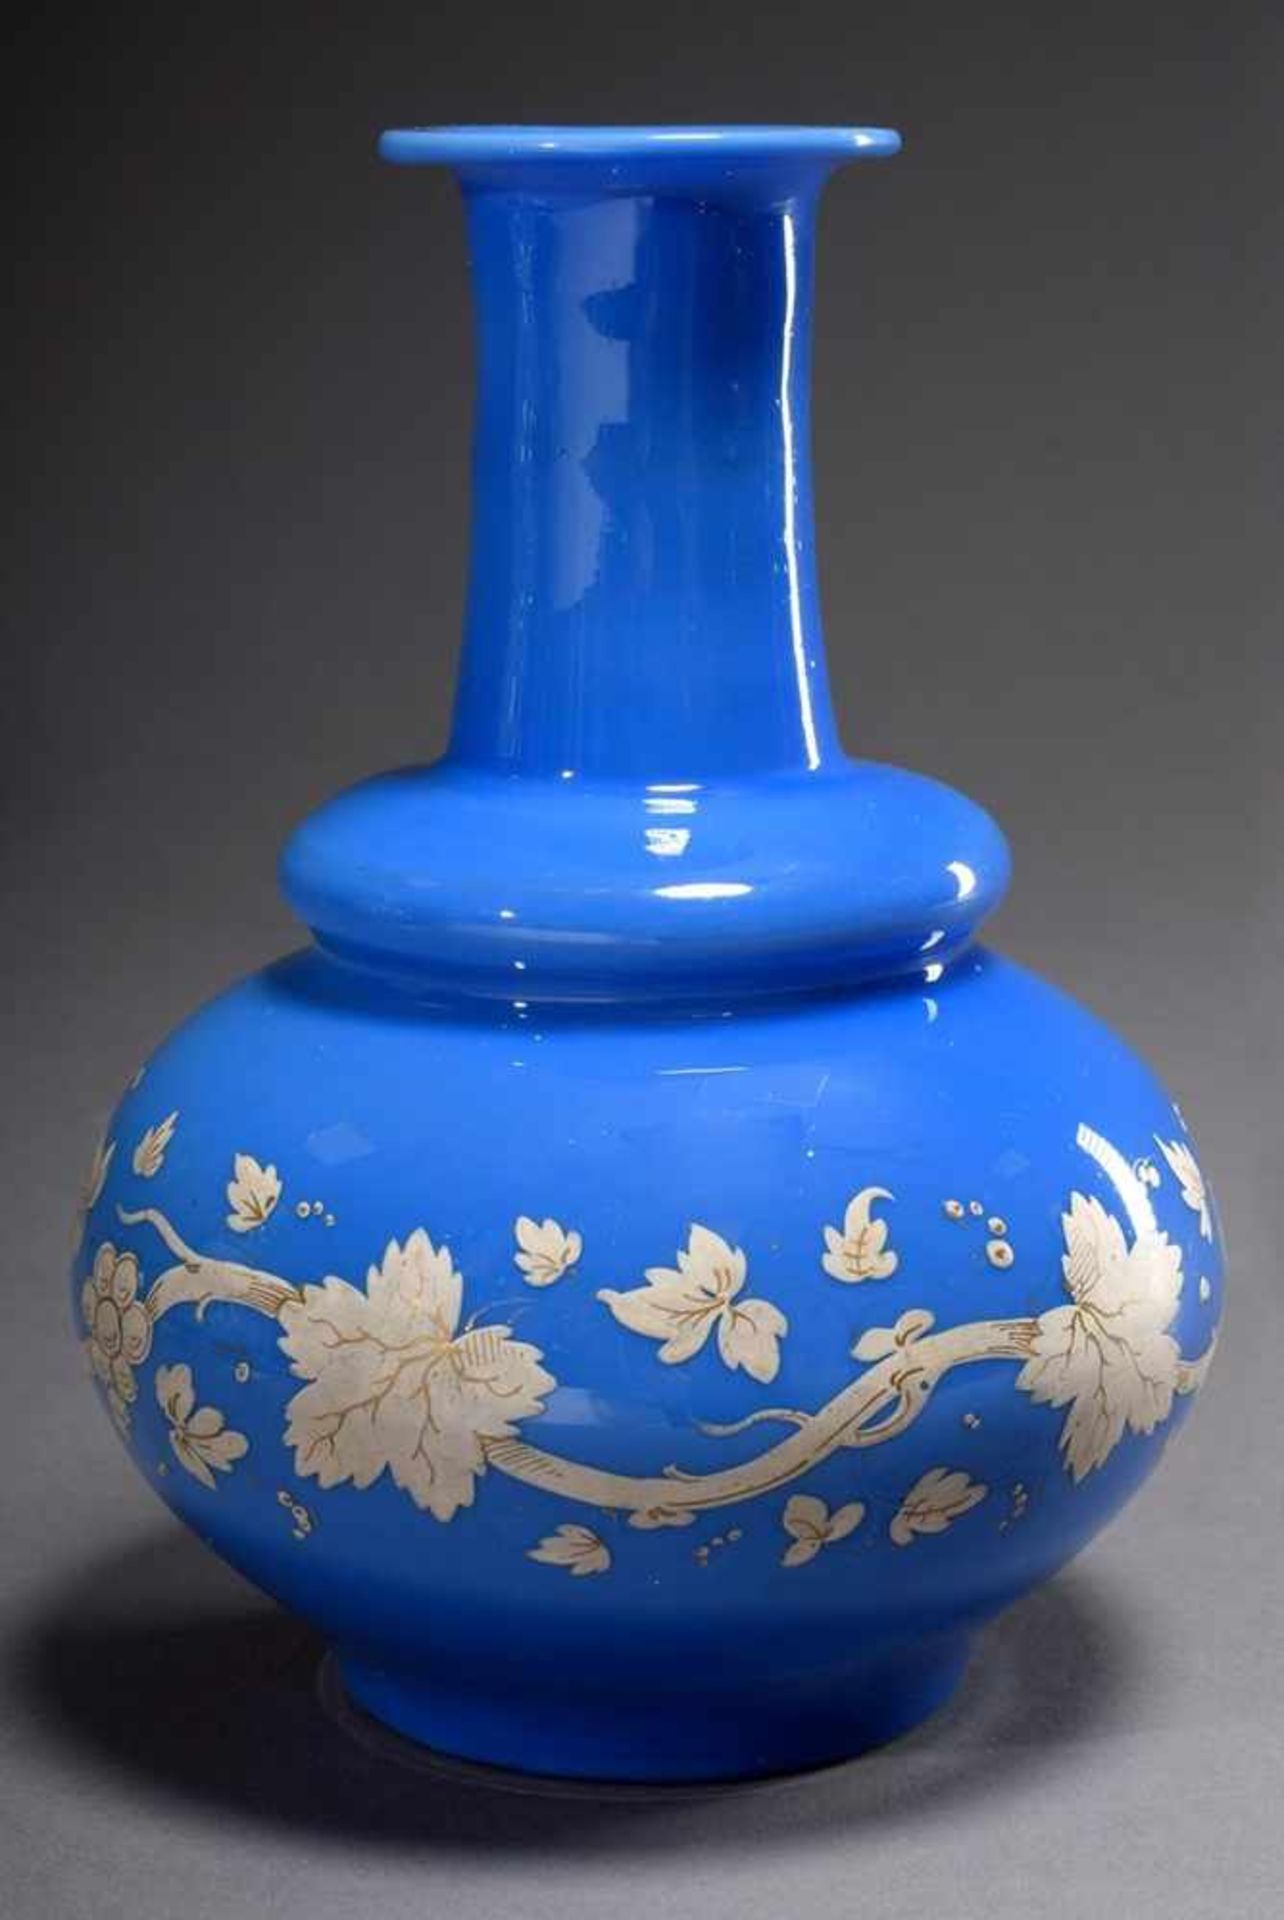 Blue milk glass vase with gold decorated vine leaves frieze, 19th century, h. 20cm, slightly